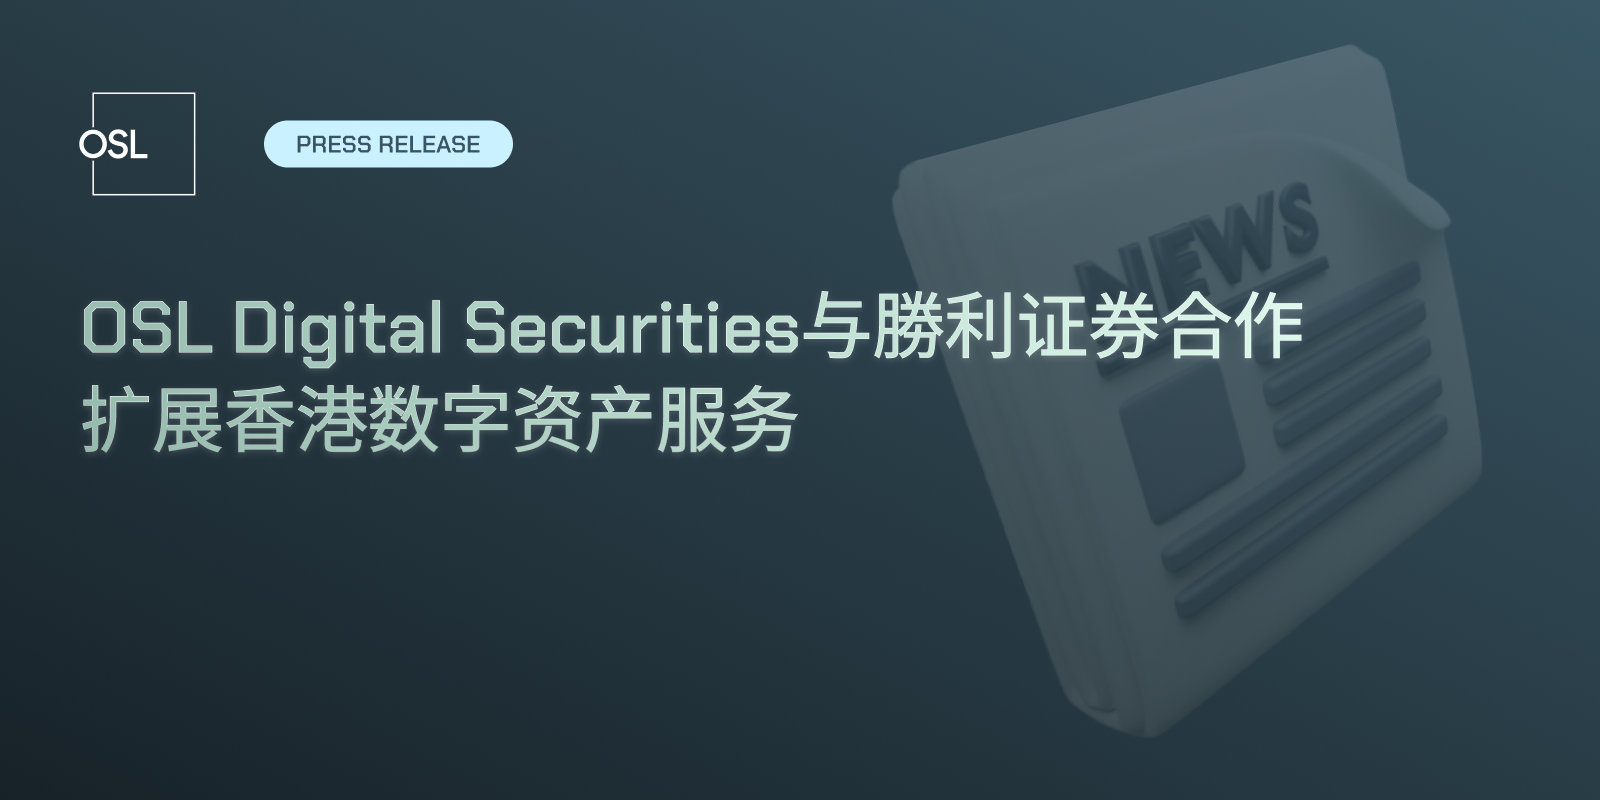 OSL Digital Securities and Victory Securities Collaborate to Expand Digital Asset Services in Hong Kong